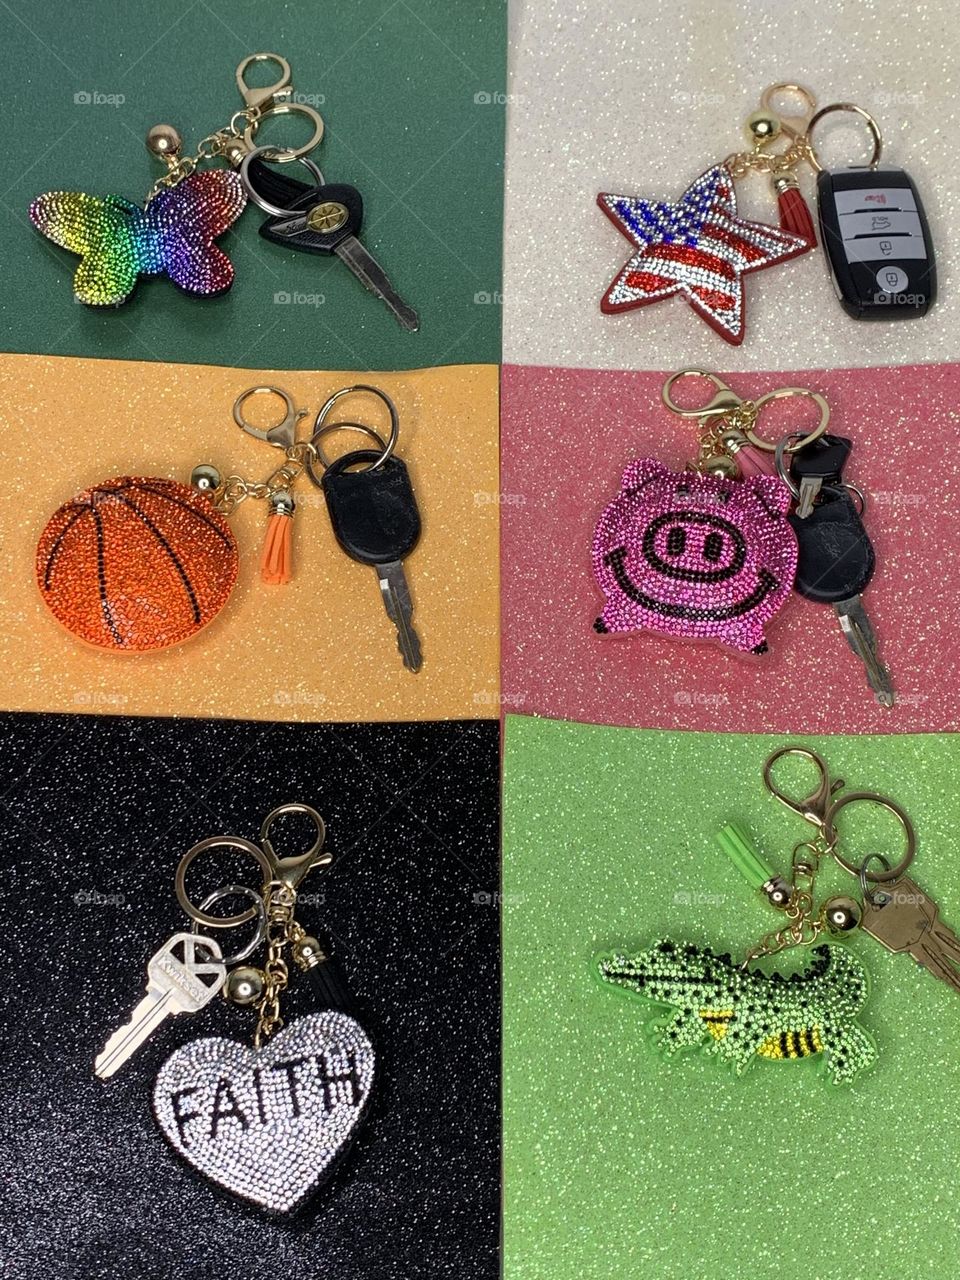 Multiple keychains - Popfizzy, a cute, glizy accessory for women or girls to add to their keychains, book bags, backpacks or purses. It's a perfect way to brighten up a day.